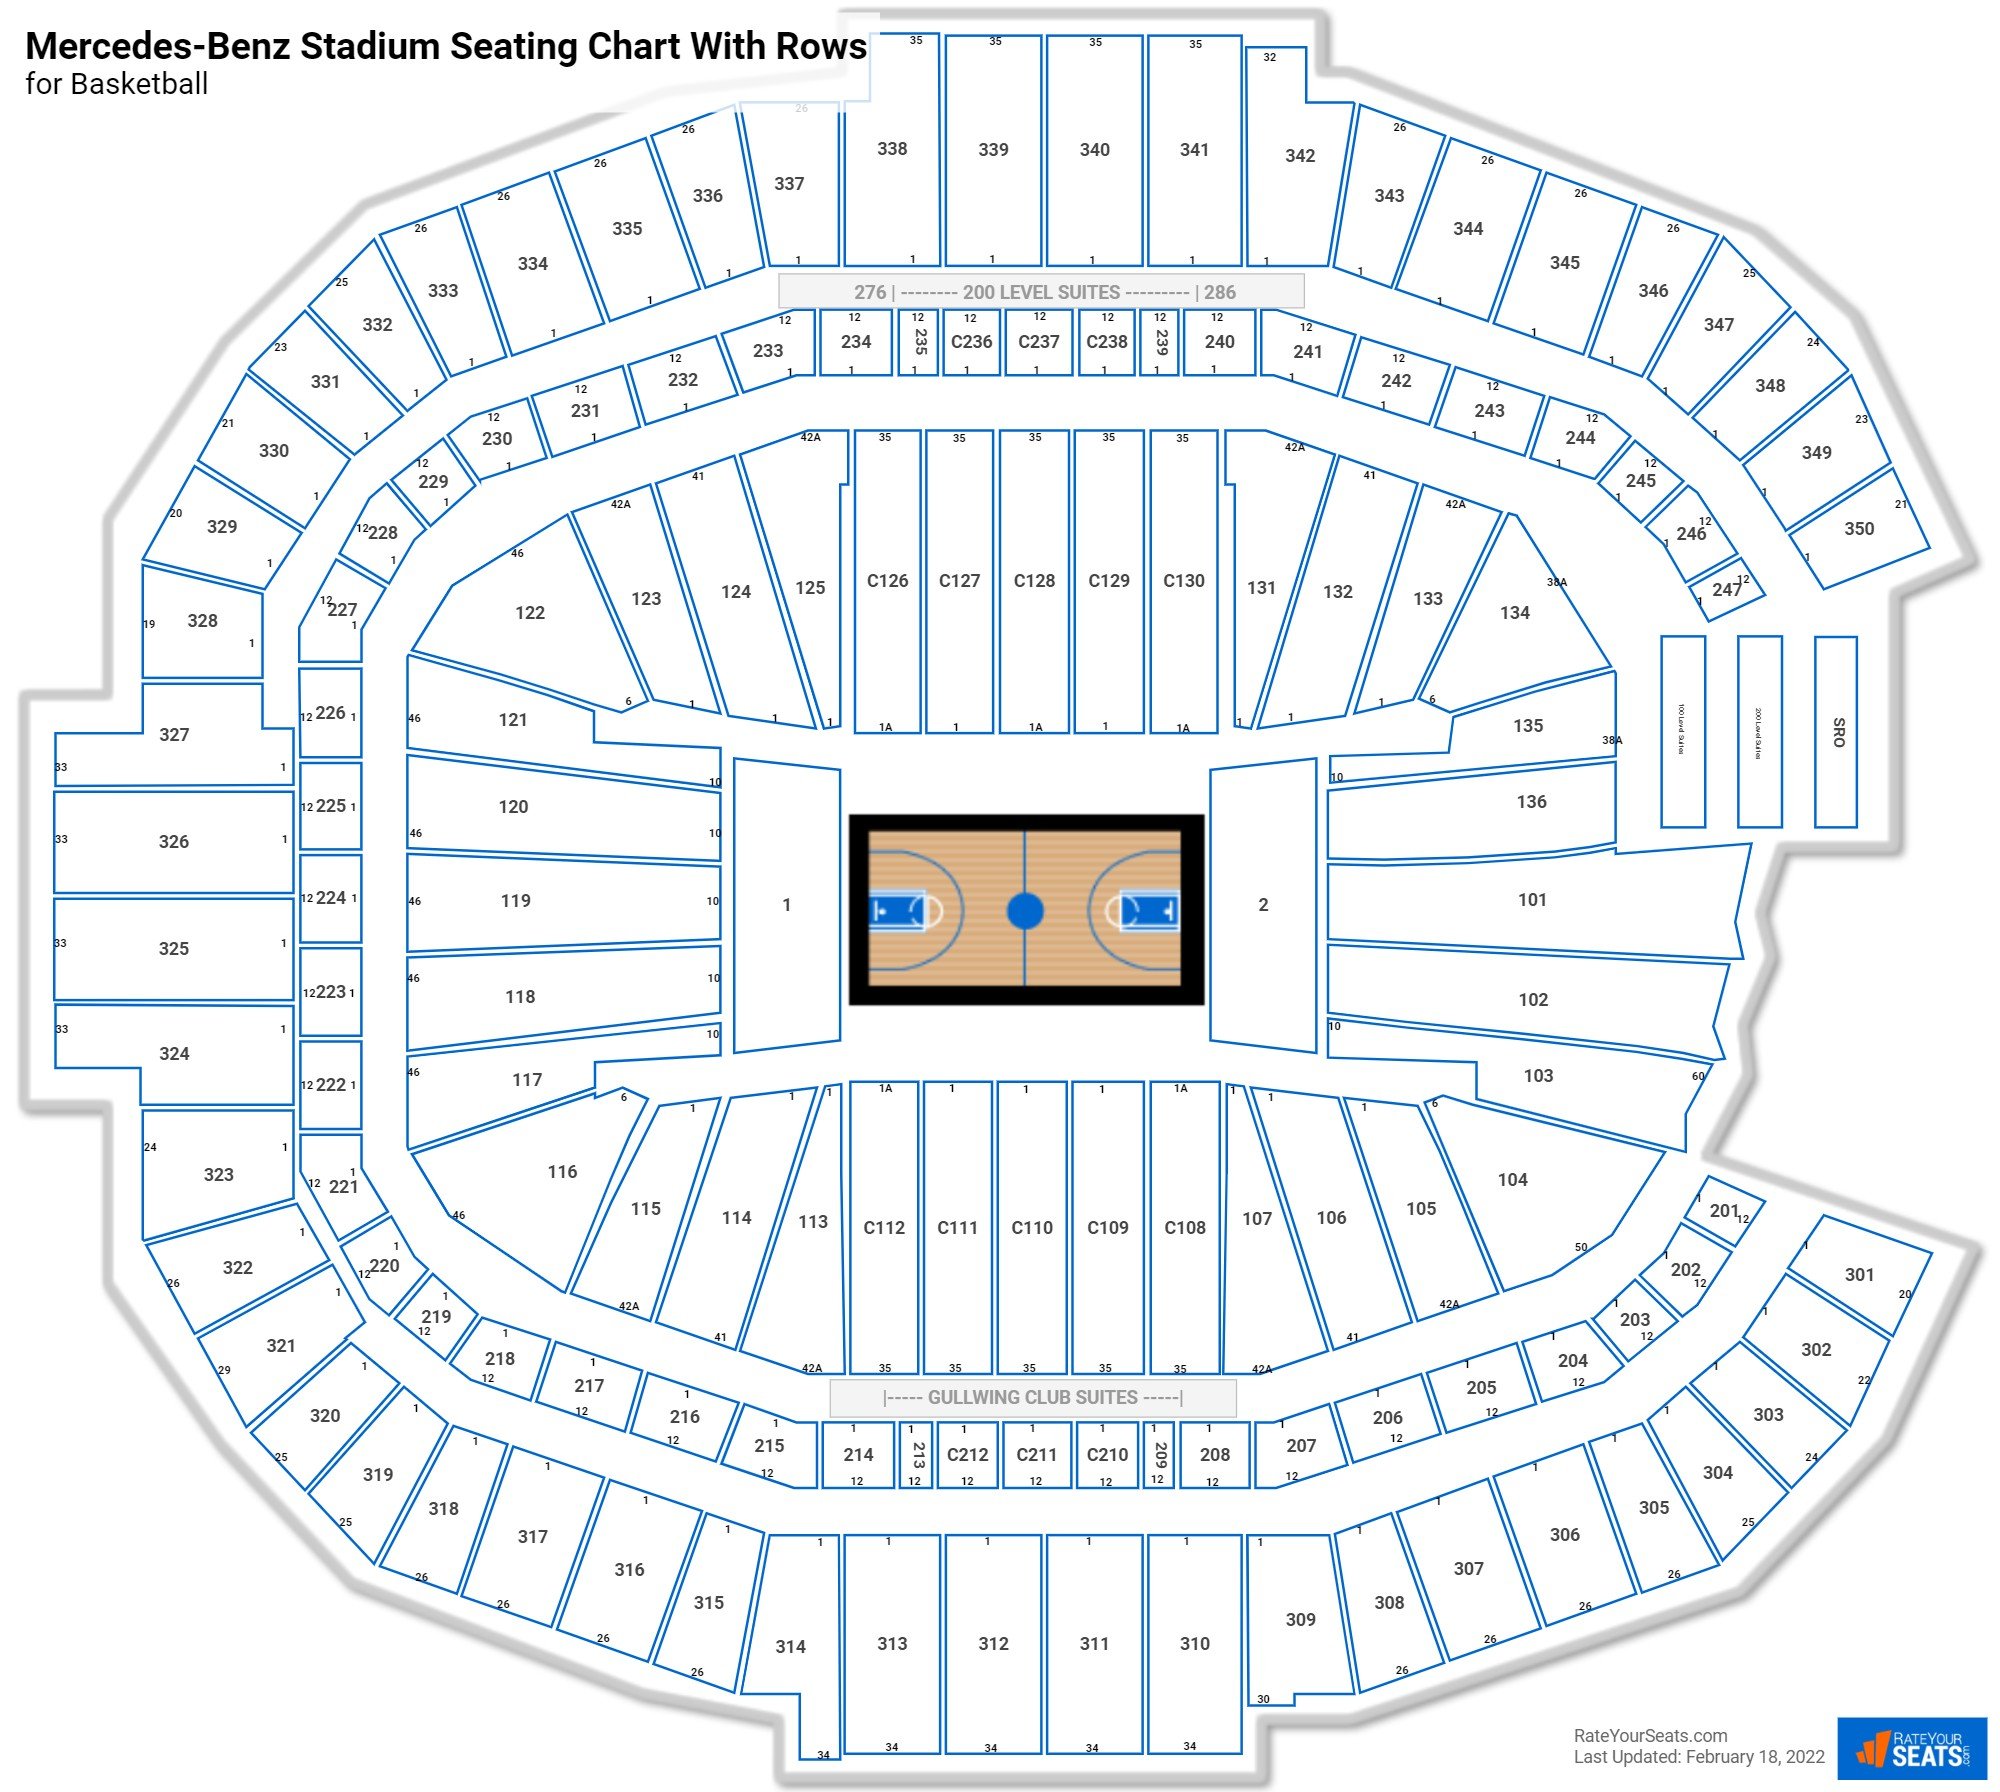 Berlin Mercedes Benz Arena Seating Plan Mercedes-Benz Stadium Seating Charts for Basketball - RateYourSeats.com